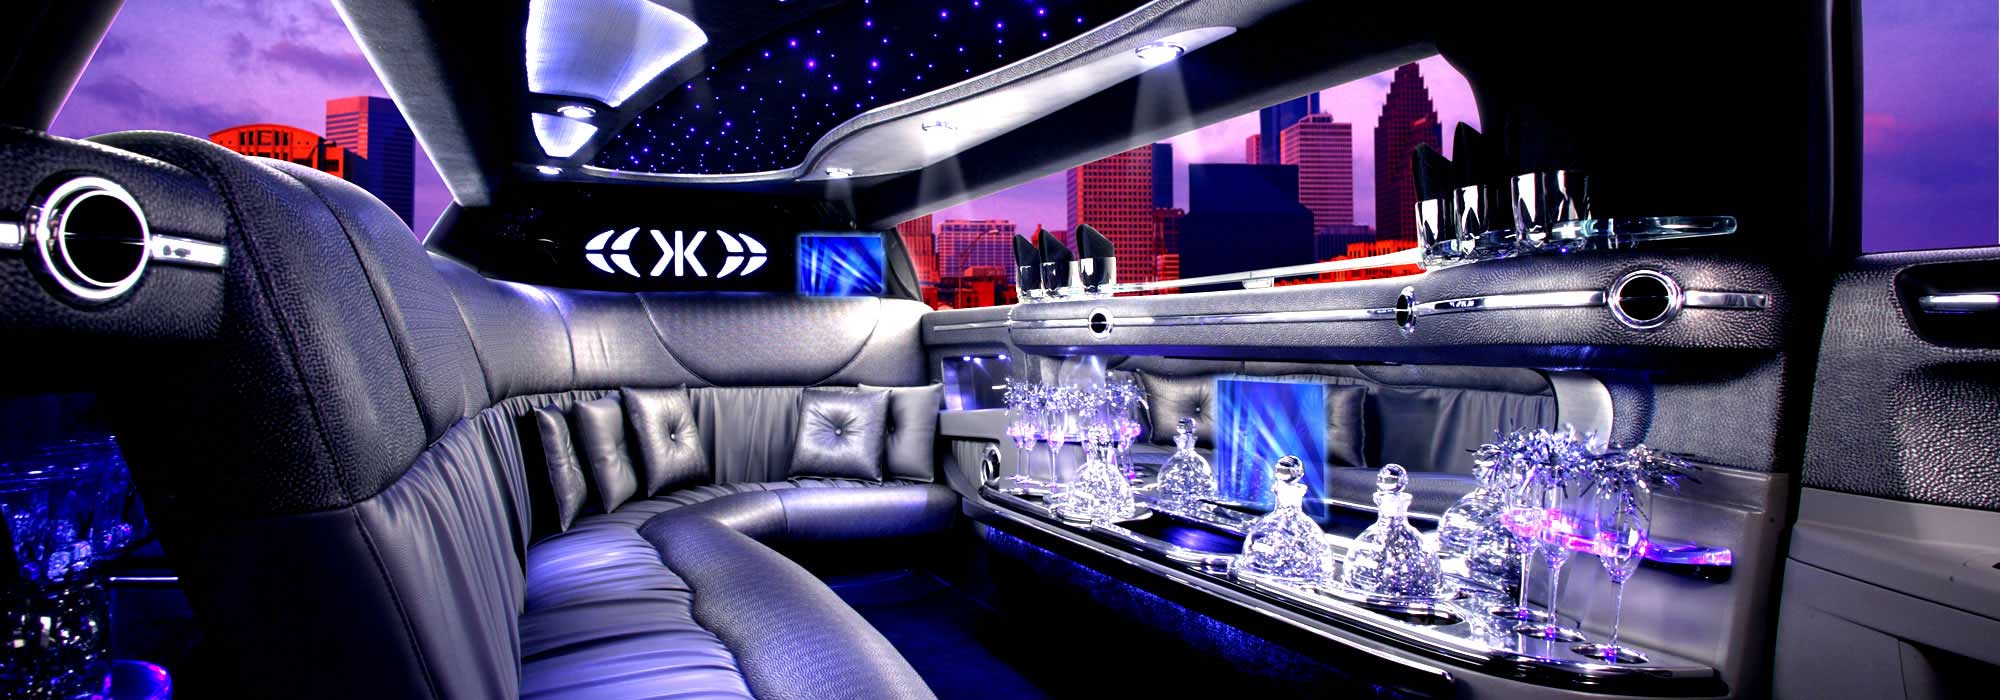 special occasion limo and birthday car hire